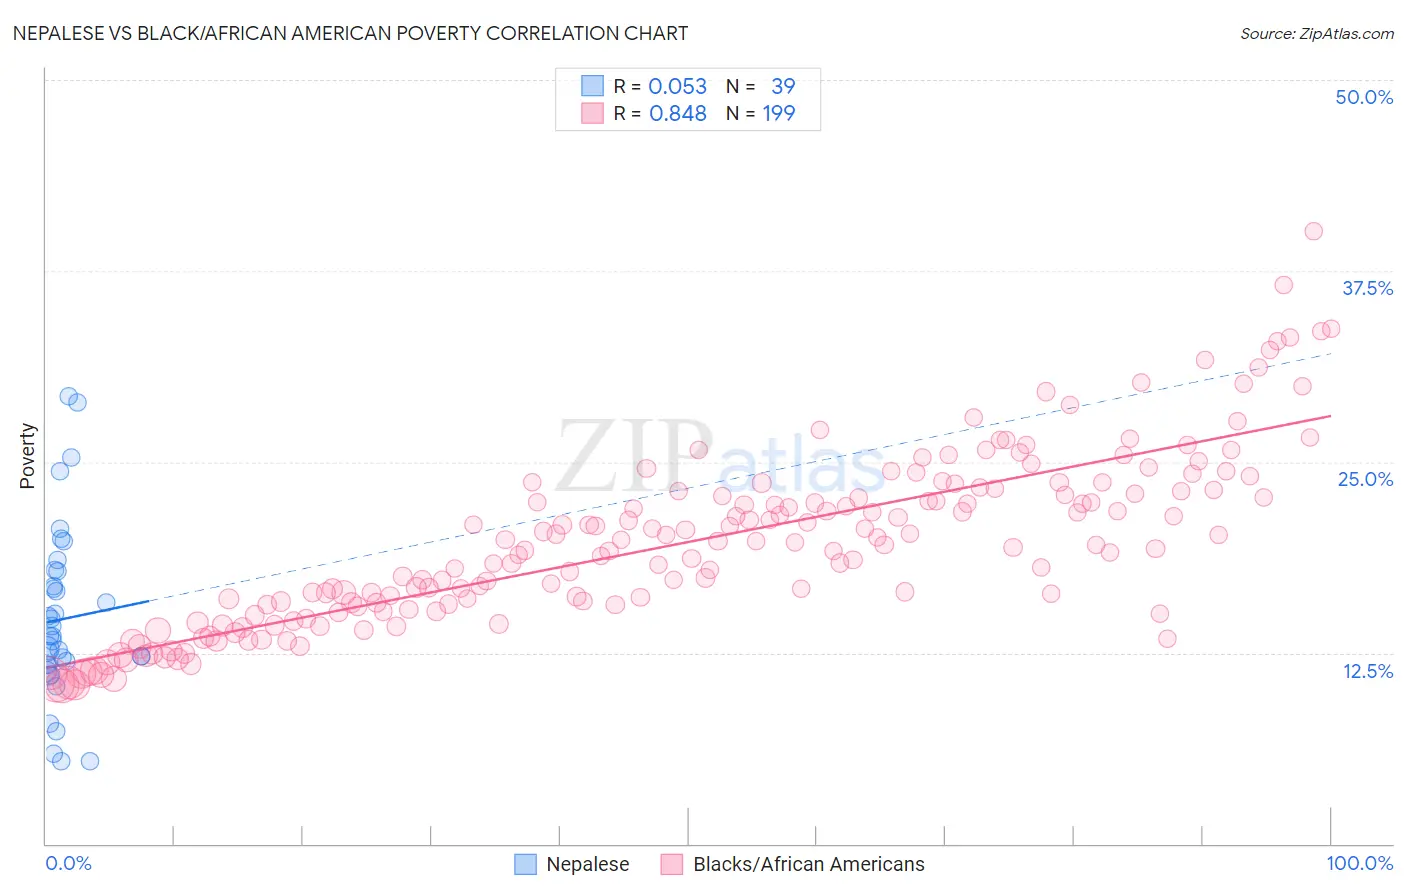 Nepalese vs Black/African American Poverty